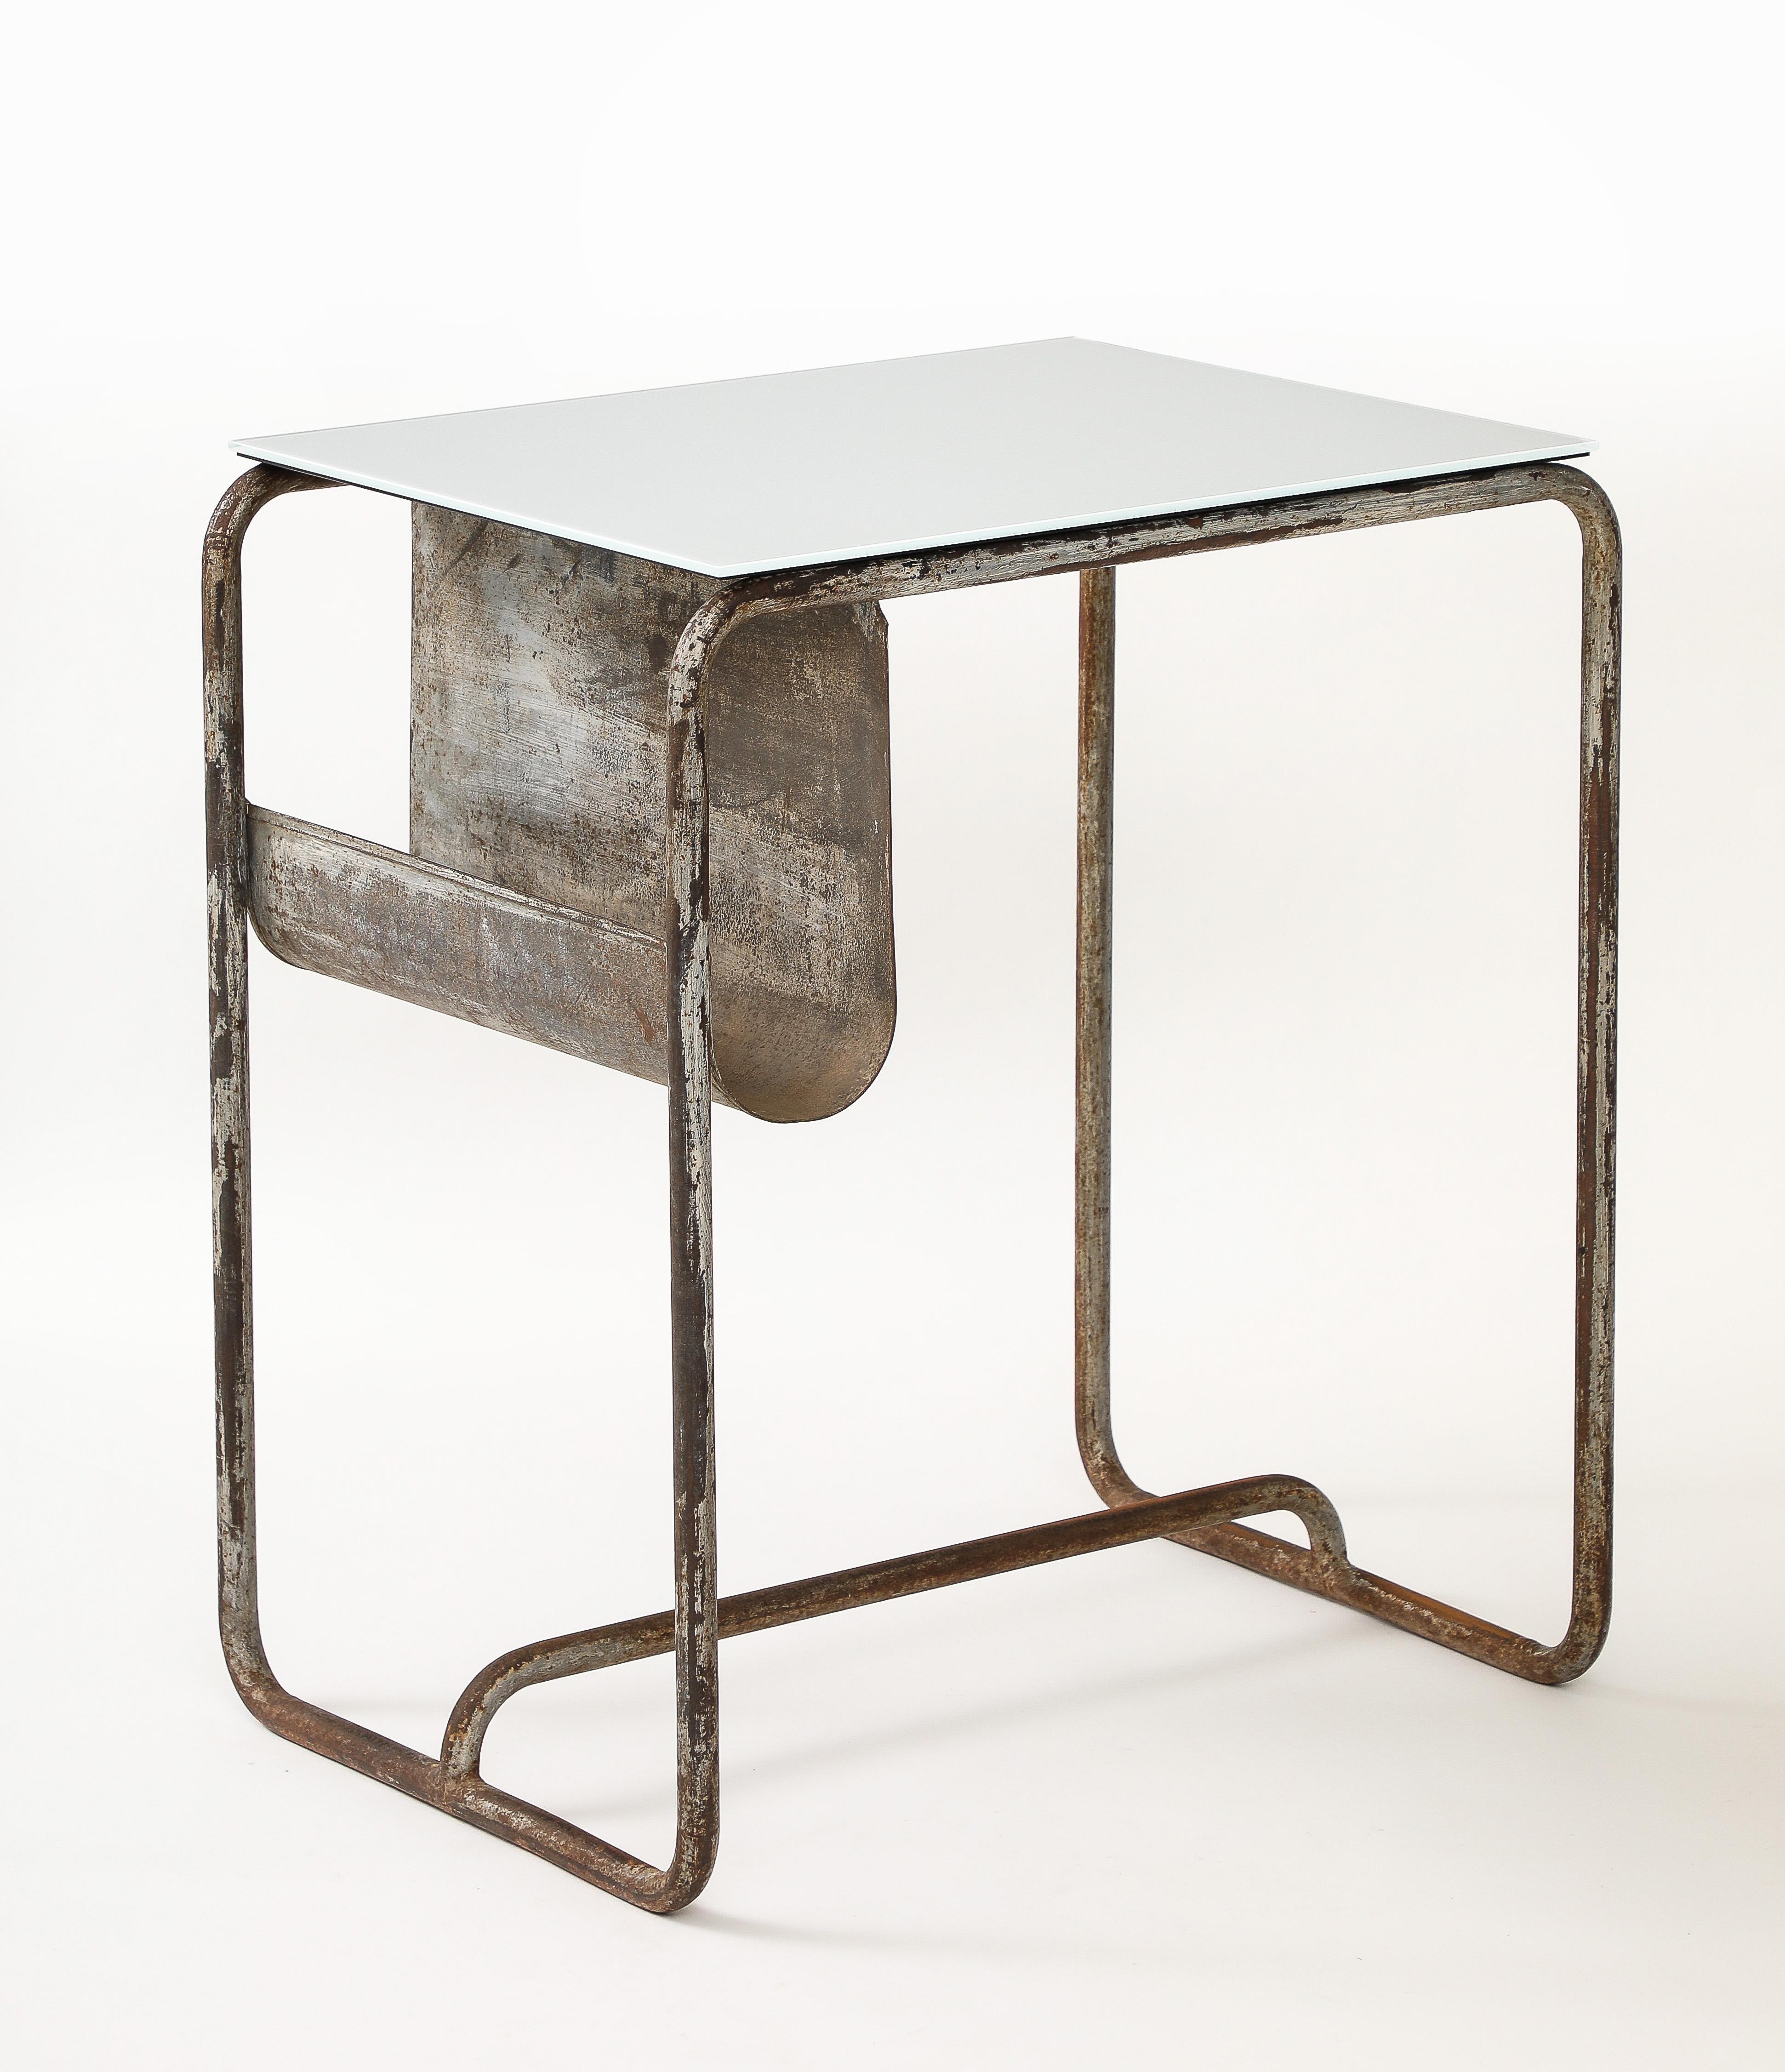 Early Modernist Desk Side Table, Nickel Patina, Opaline Top, France, c. 1920 For Sale 4